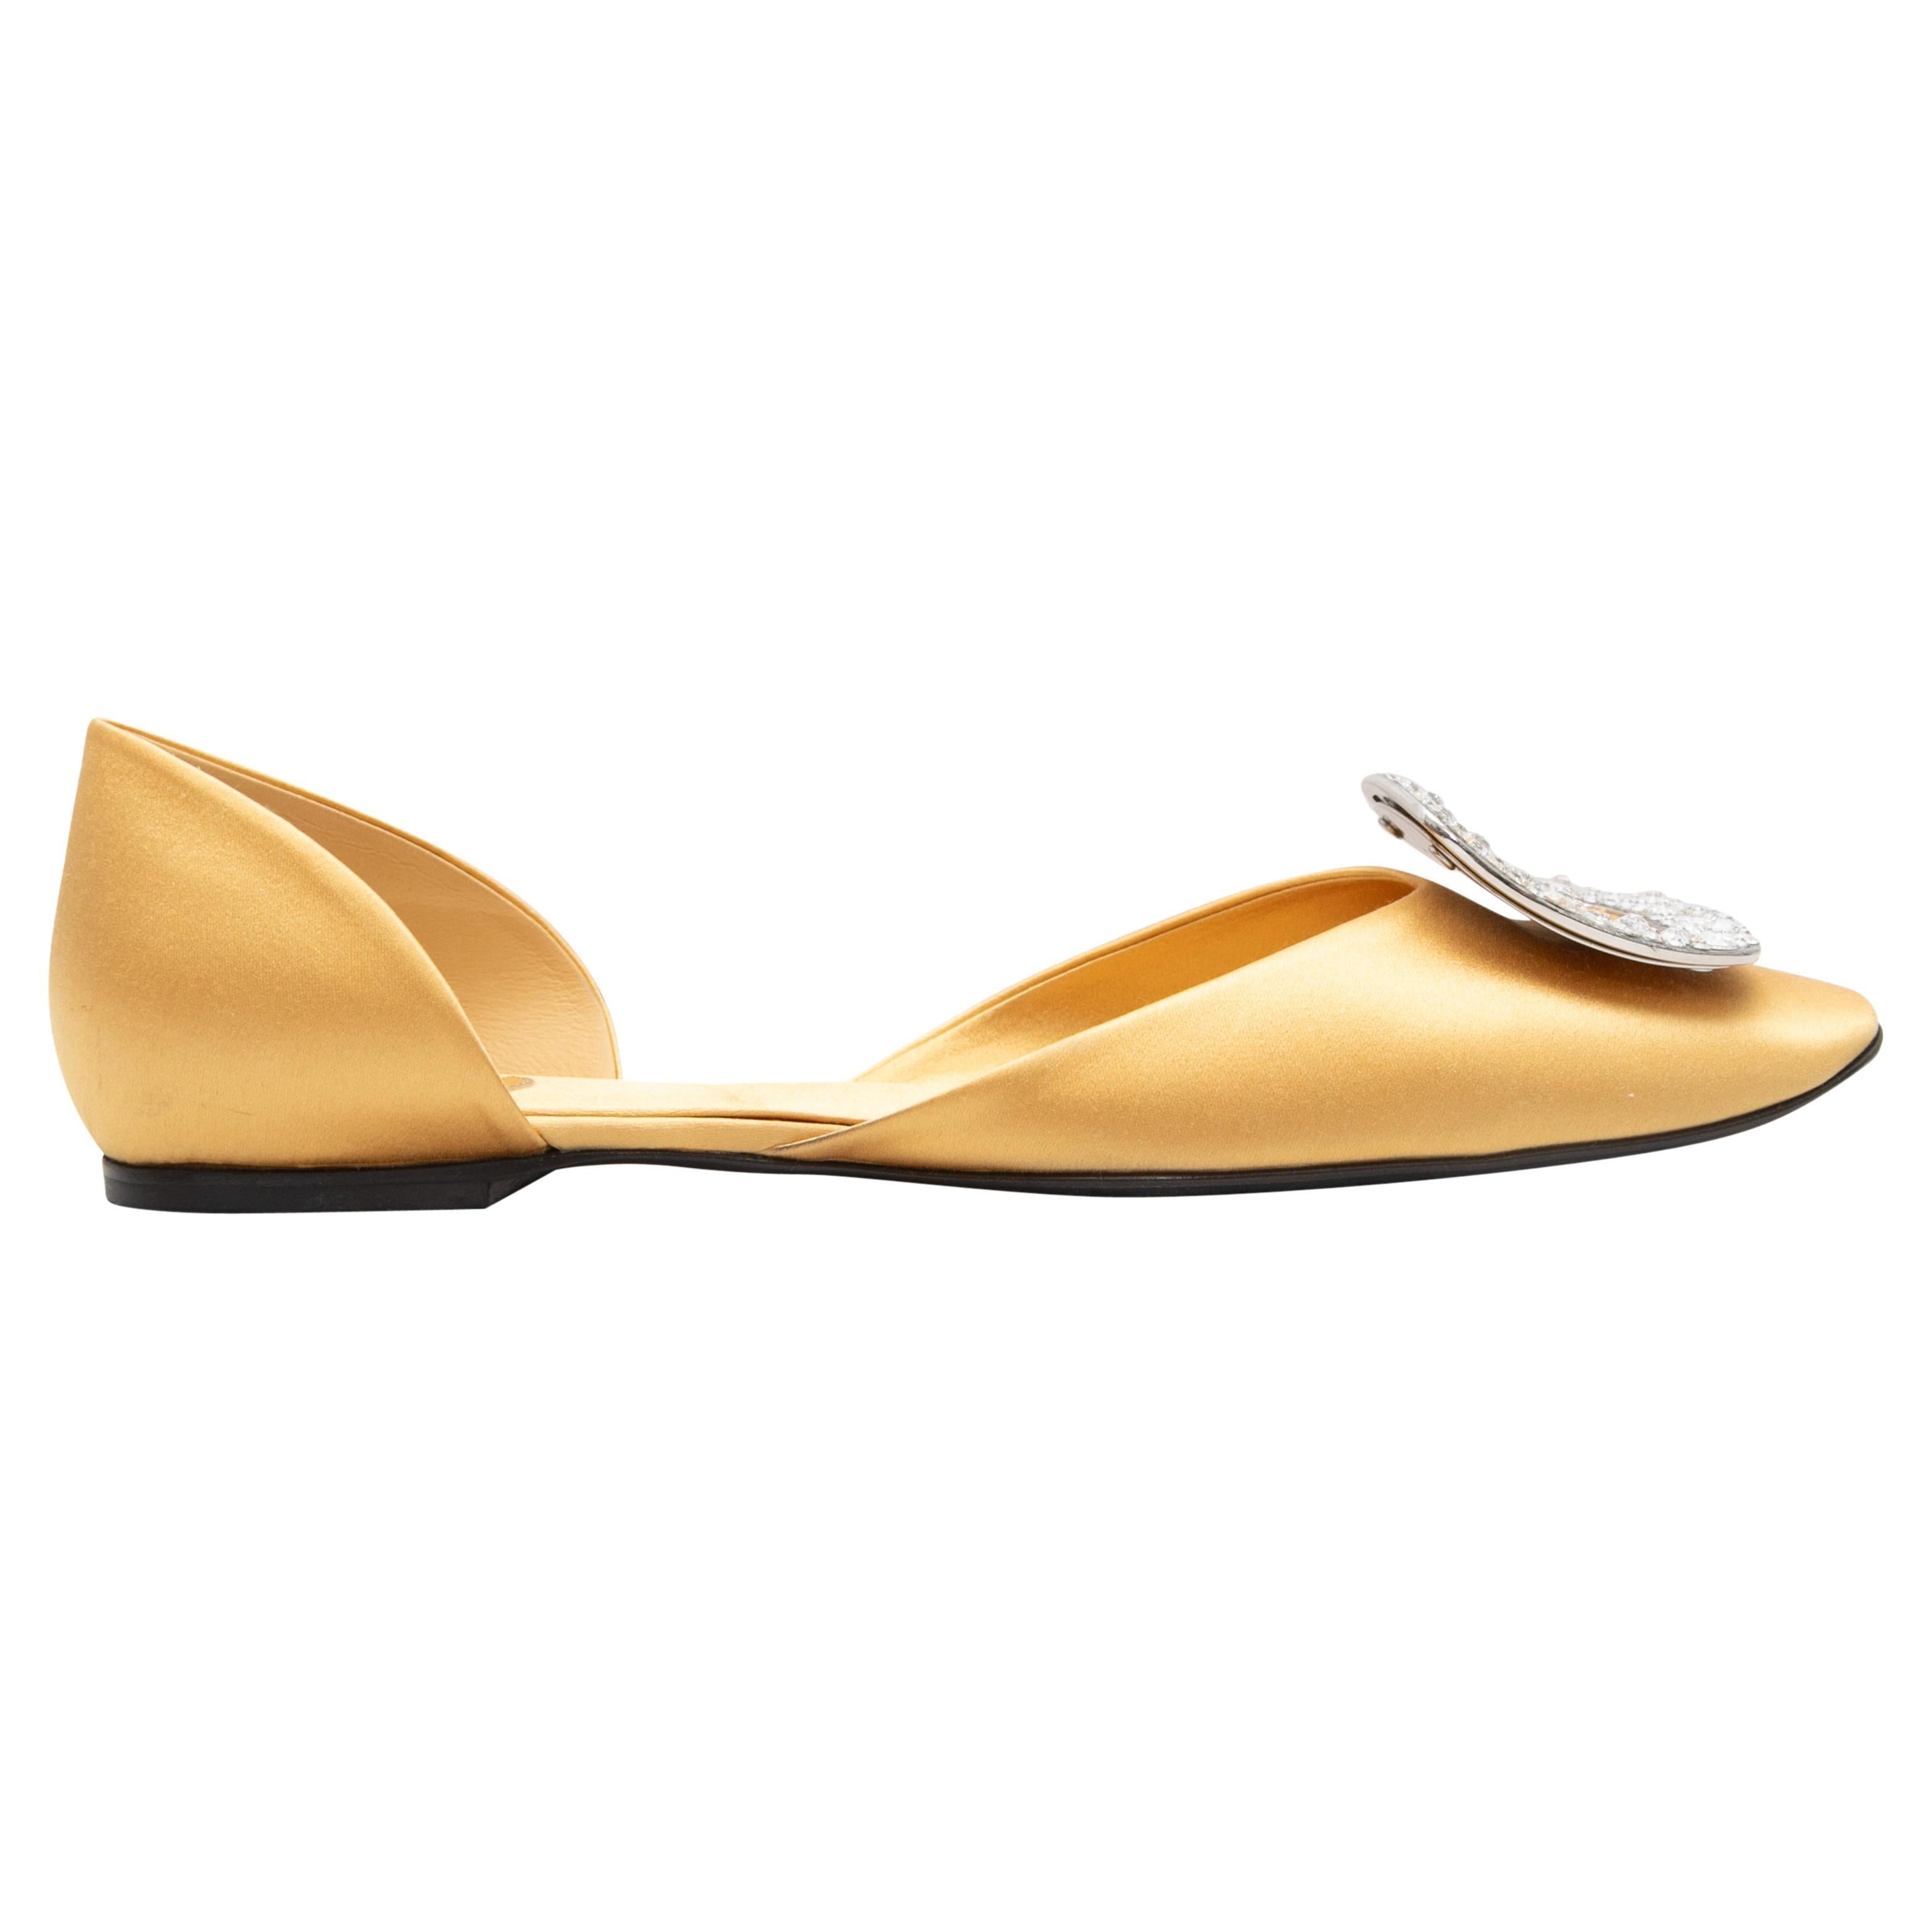 Yellow Roger Vivier Satin d'Orsay Buckle Flats Size 39